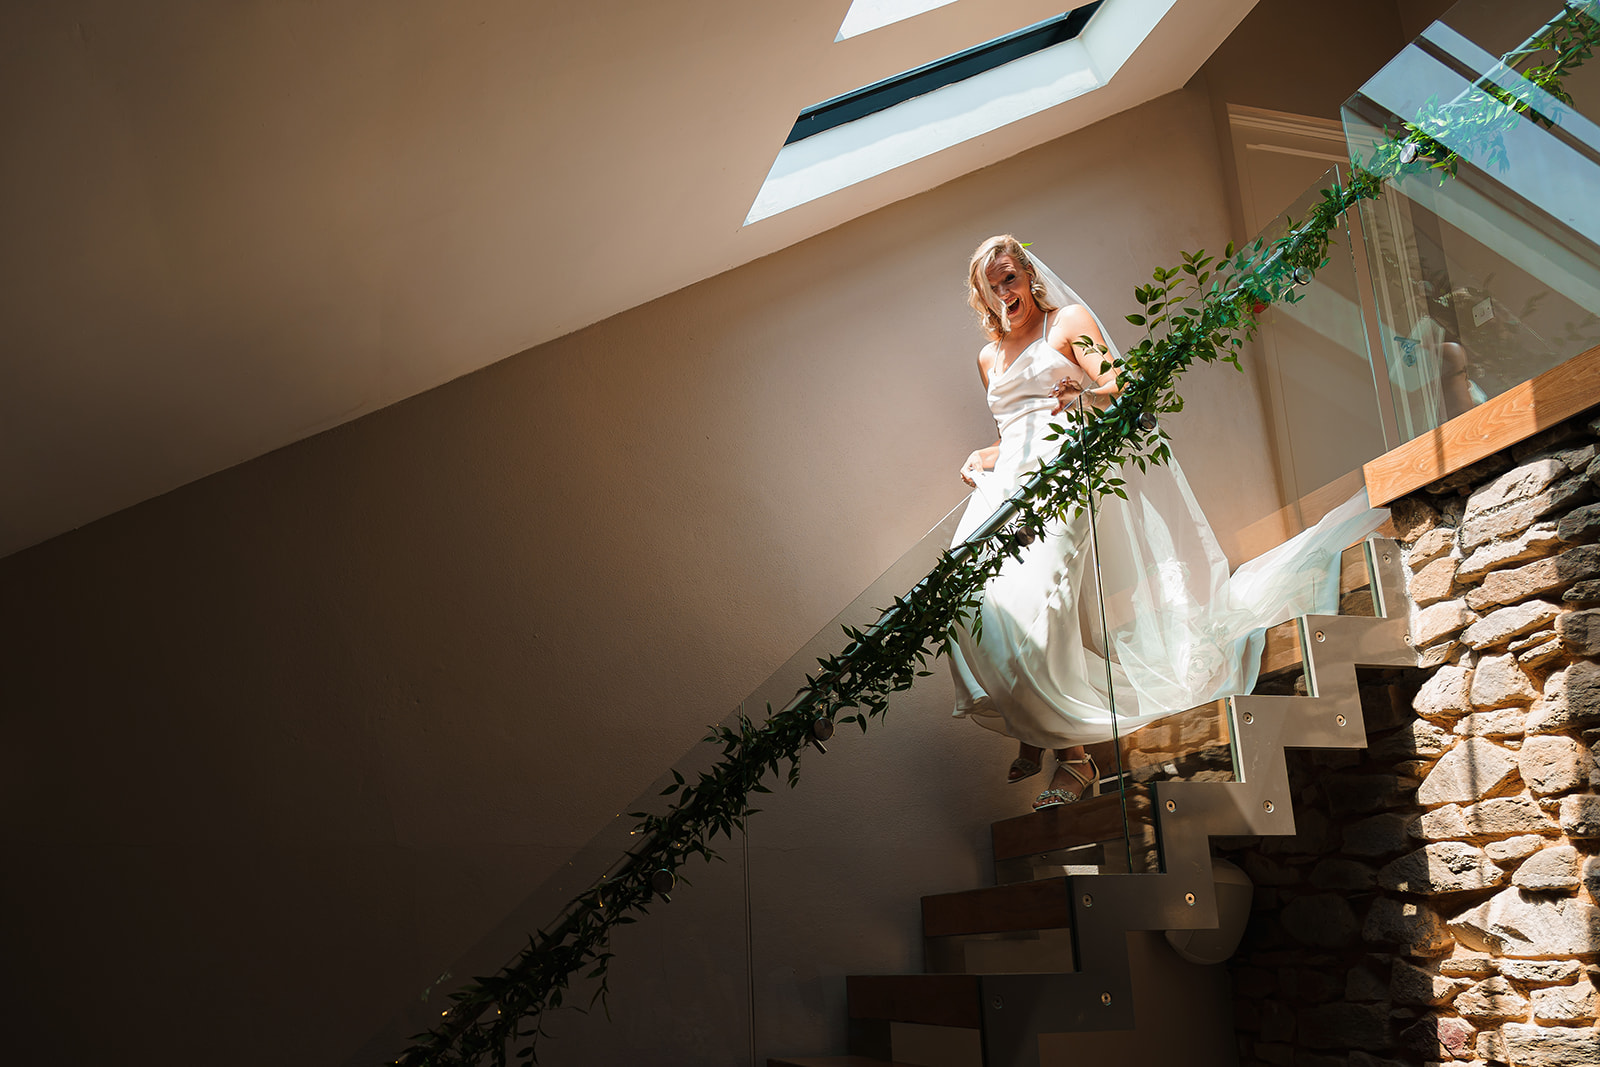 A bride walks down the stairs under a skylight which pours beautiful soft light onto her. The banister is styled with foliage. By Tracey Warbey Photography